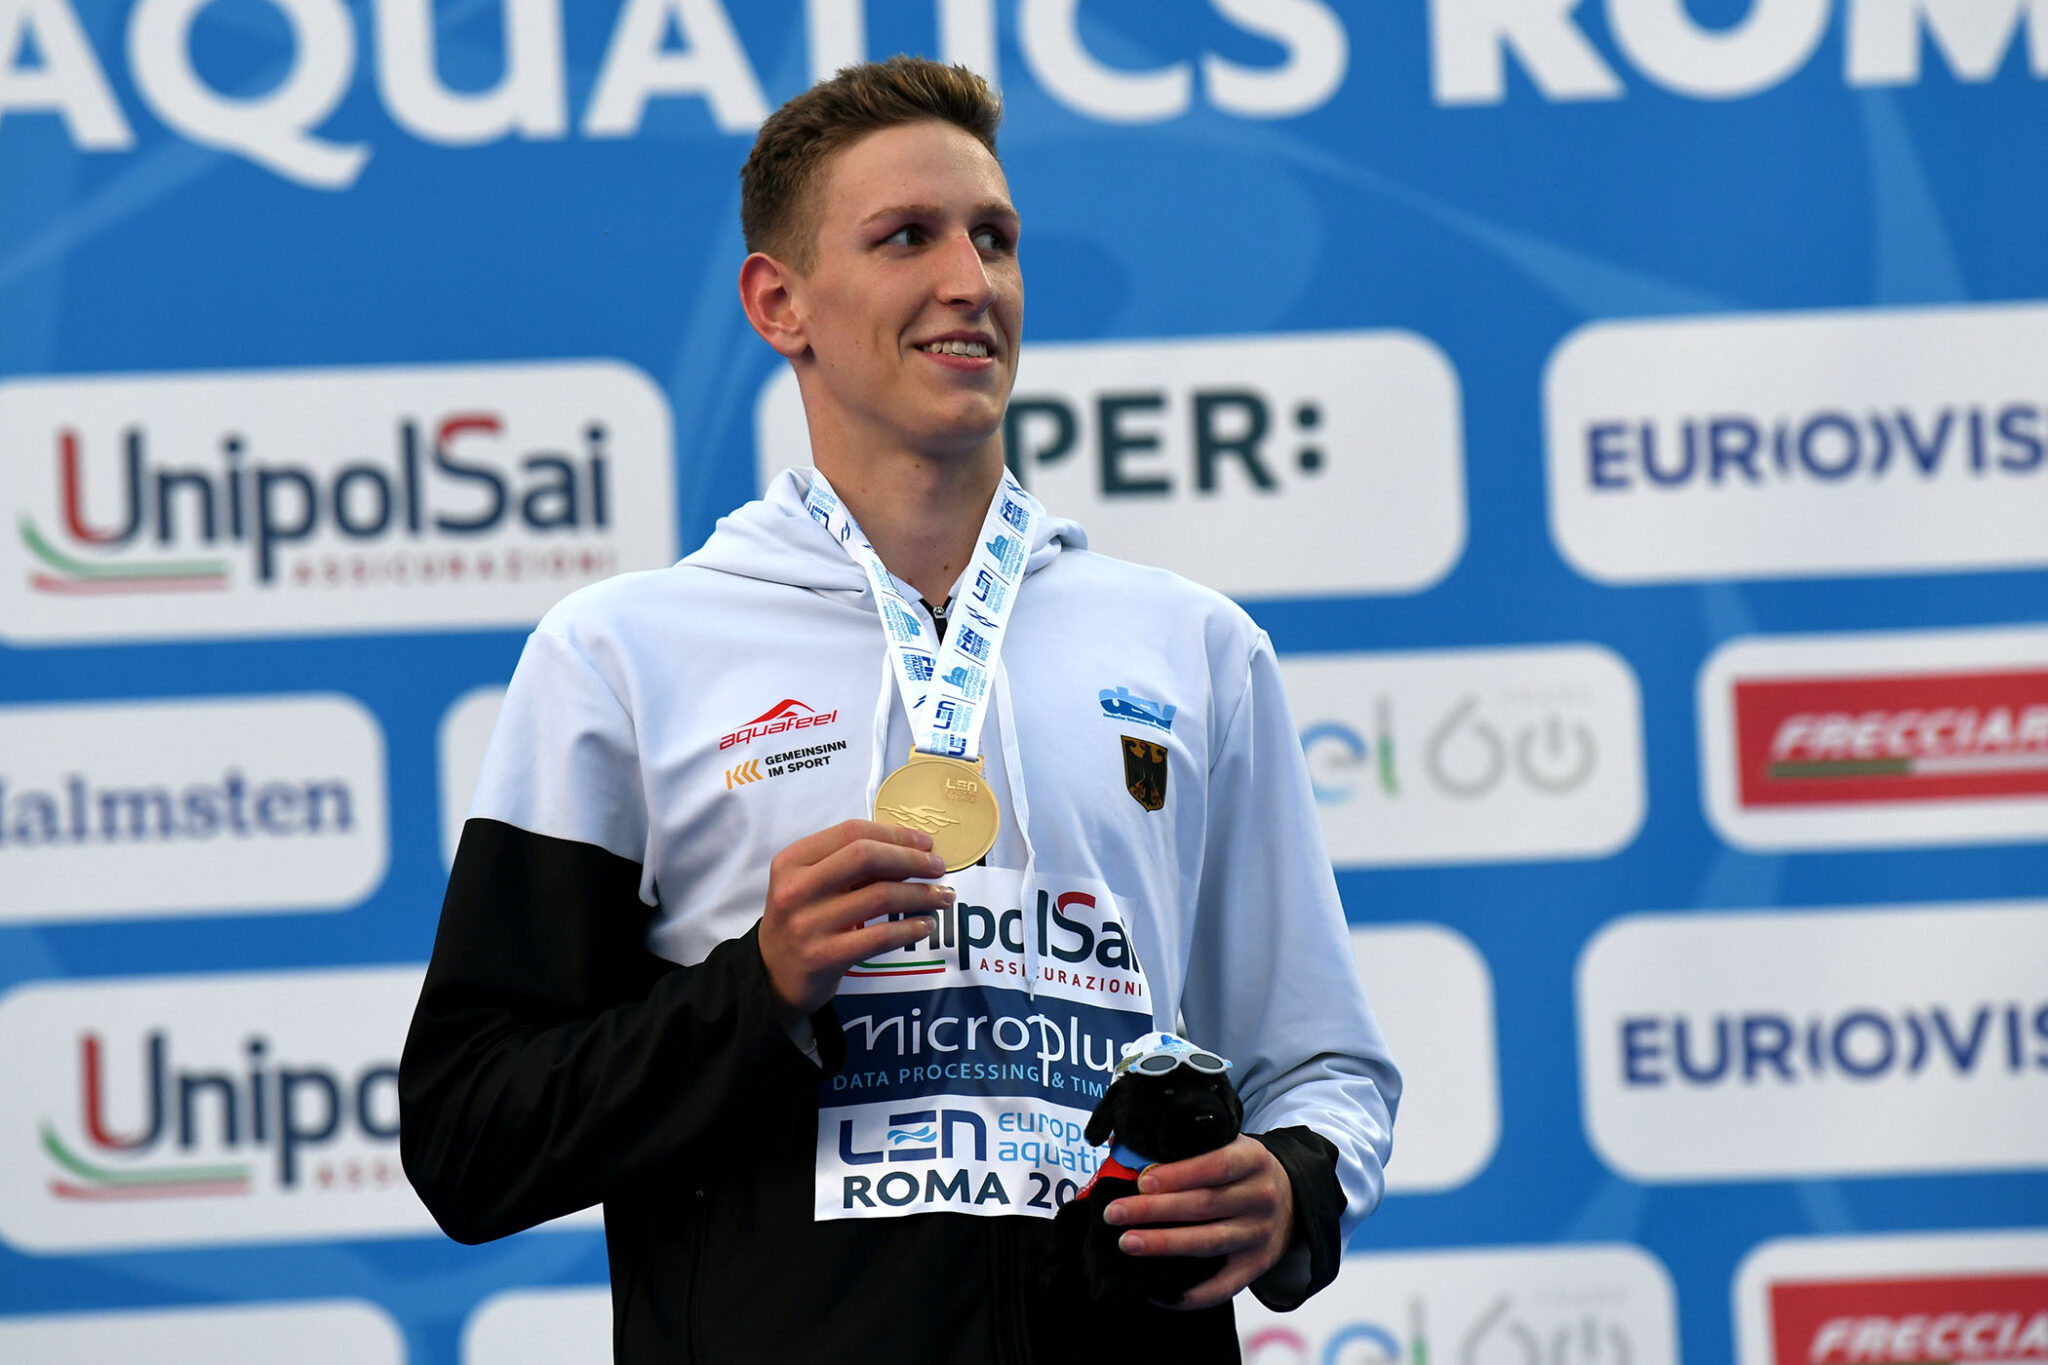 Breaking Records: German Swimmer Lukas Maertens Sets New Personal Best in 400 Freestyle at the Olympic Trials